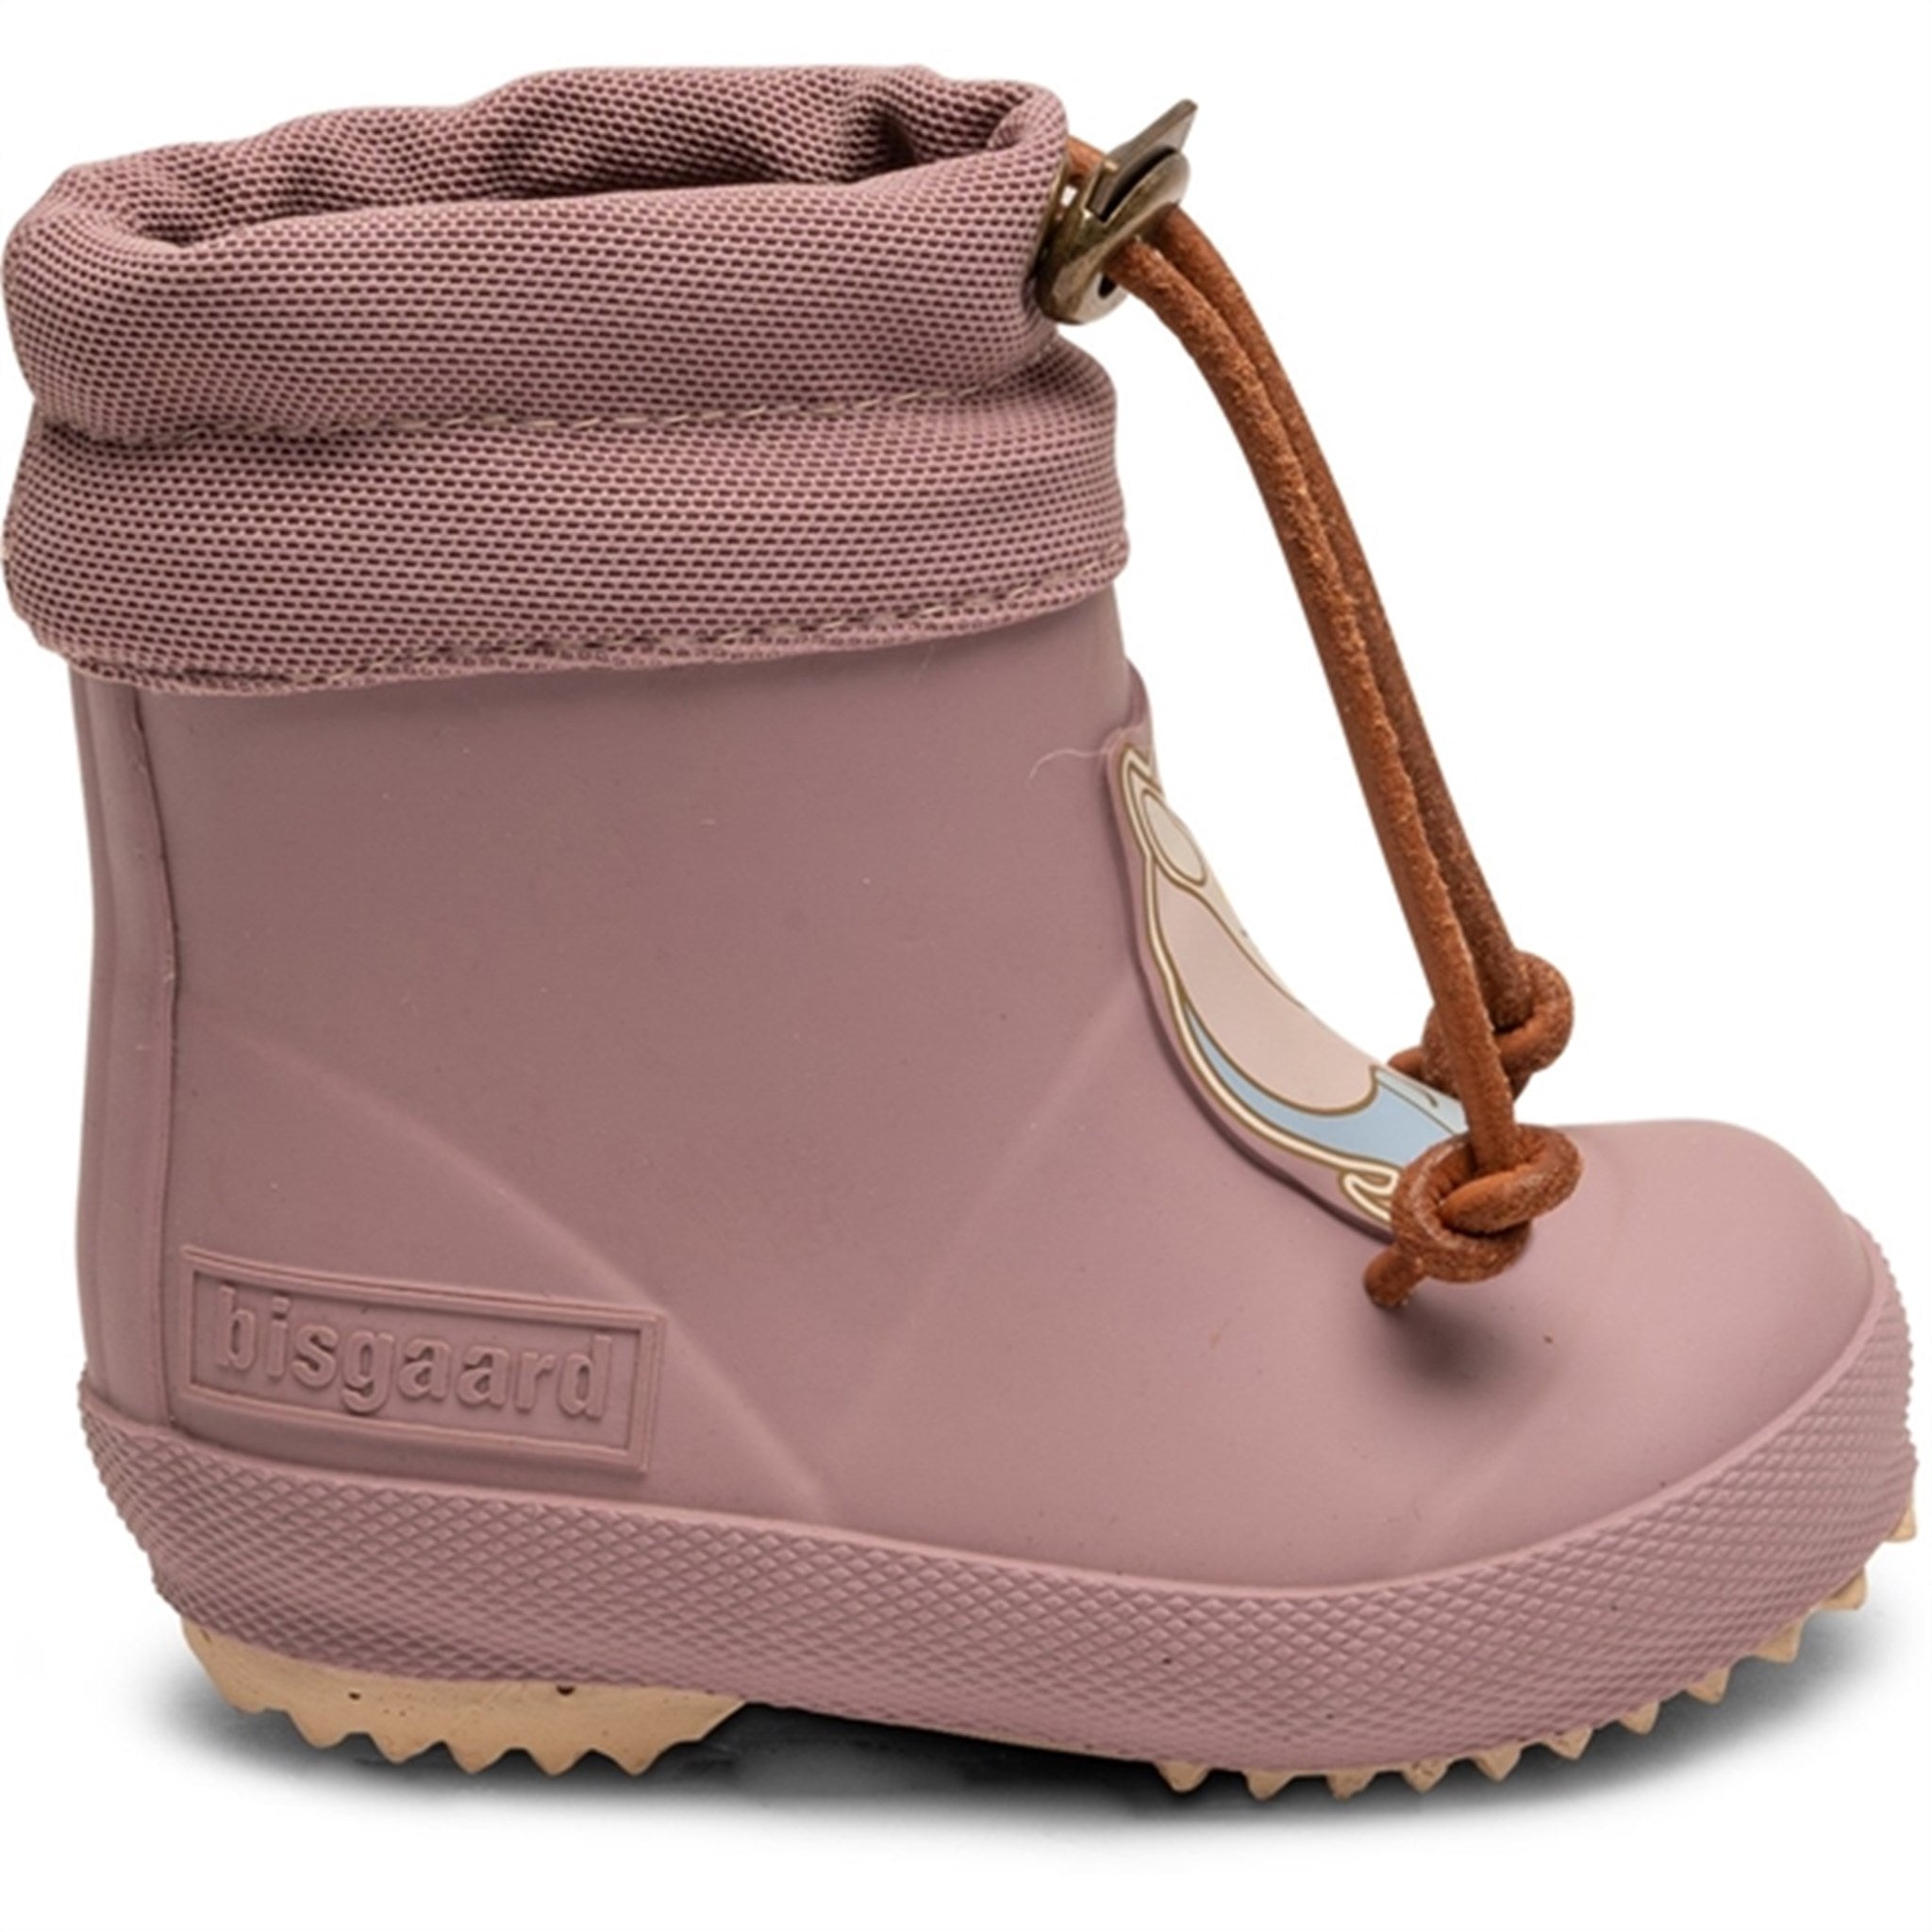 Bisgaard Thermo Baby Rubber Boots Unicorn 2